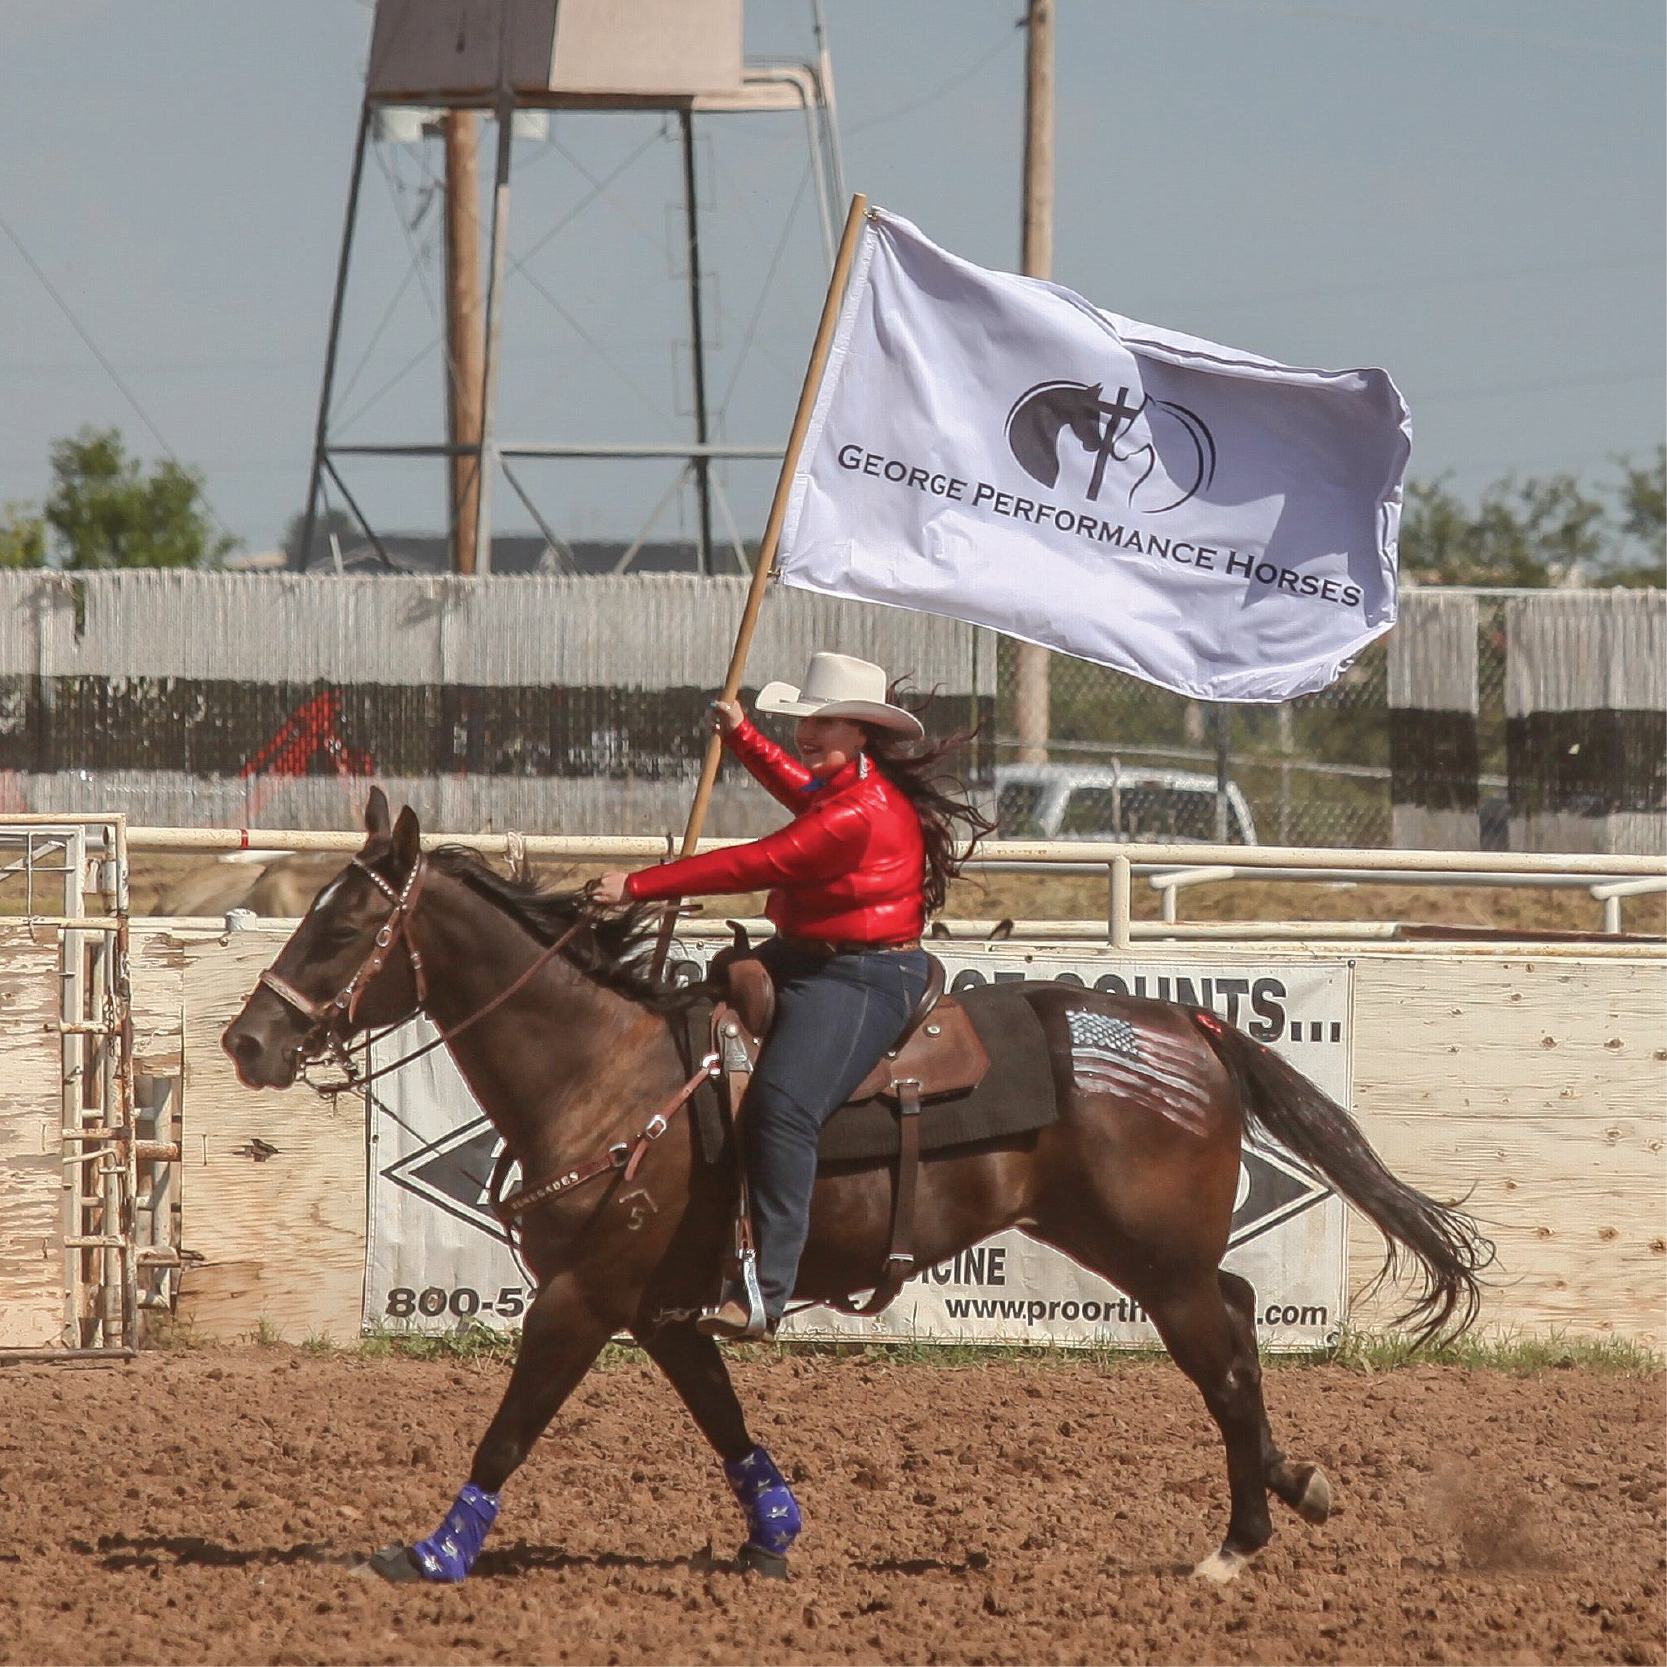 Custom printed rodeo flag for chuck wagon derby, horse races, rodeos and more. custom printed flag double sided for rodeos